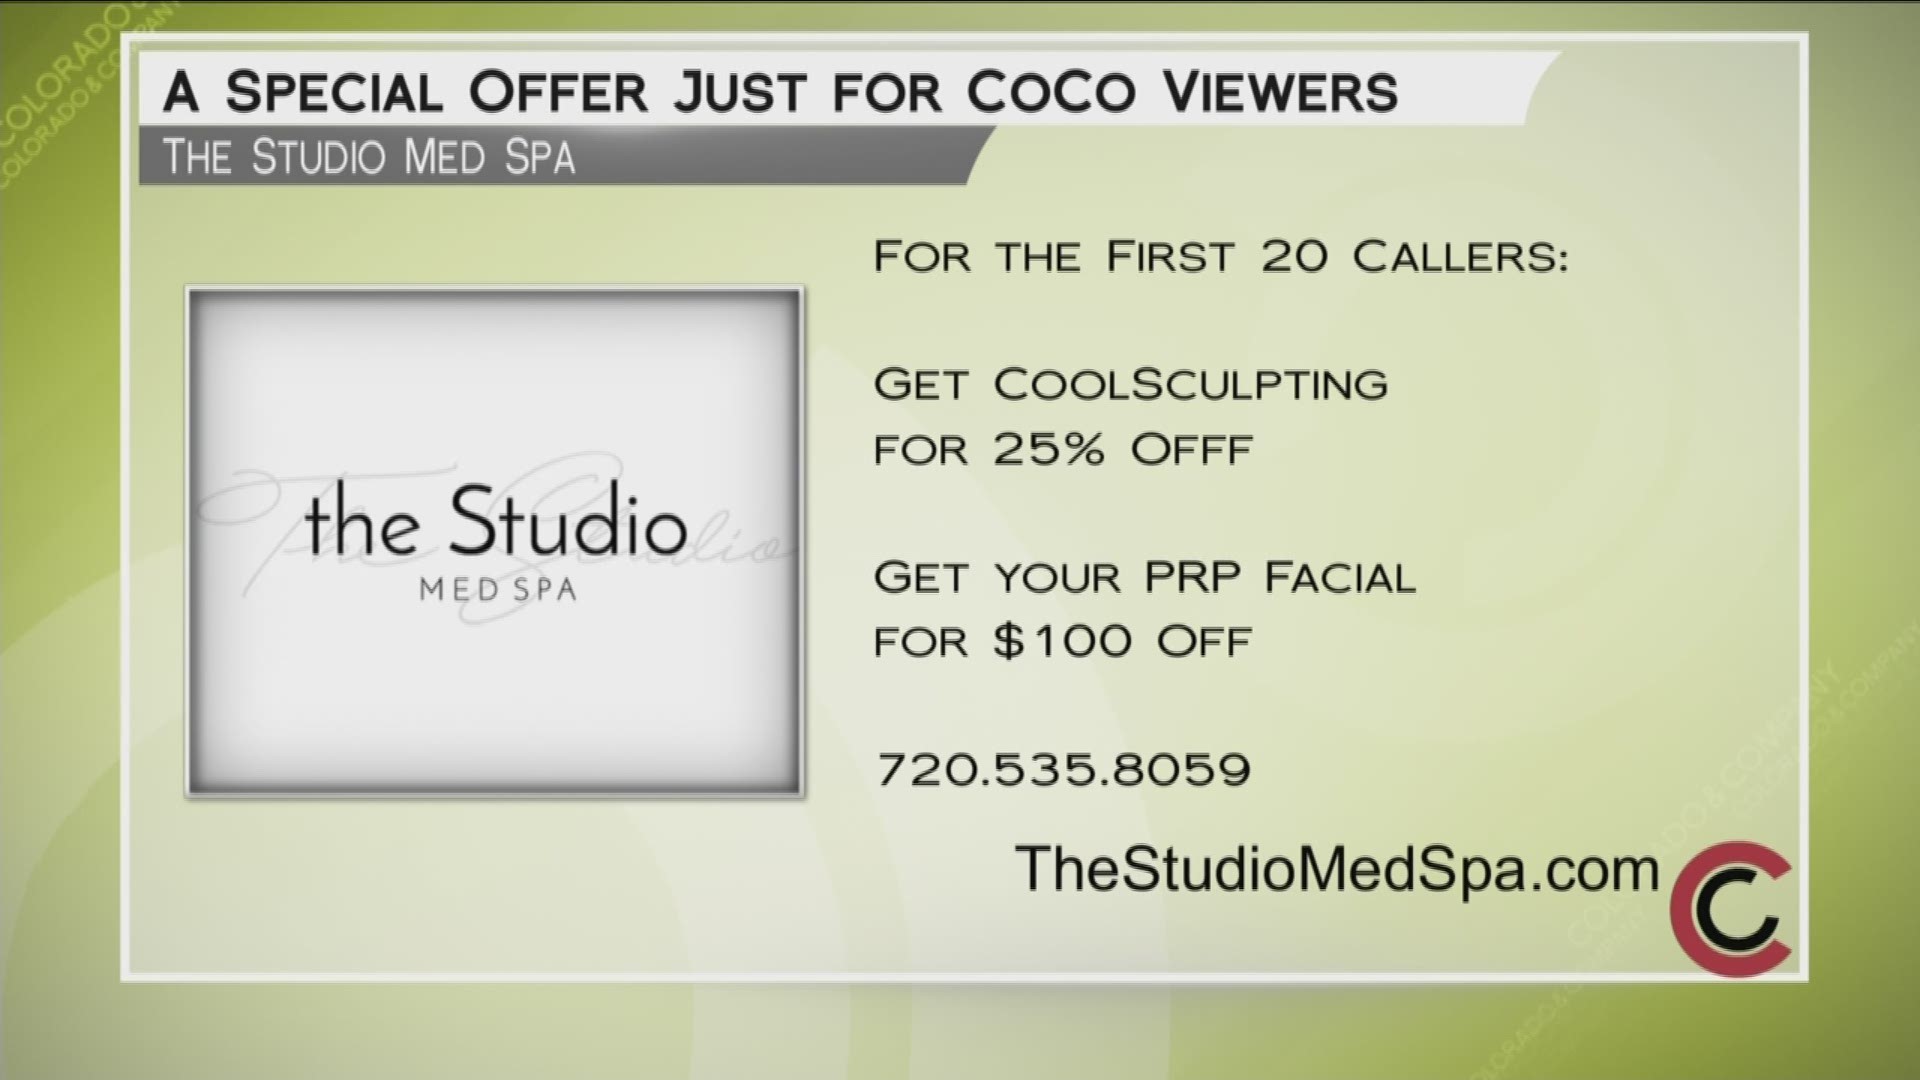 The first 20 callers to The Studio Med Spa can get 25% off Coolsculpting and $100 off a PRP Facial. Call 720.535.8059 or visit TheStudioMedSpa.com for more info.